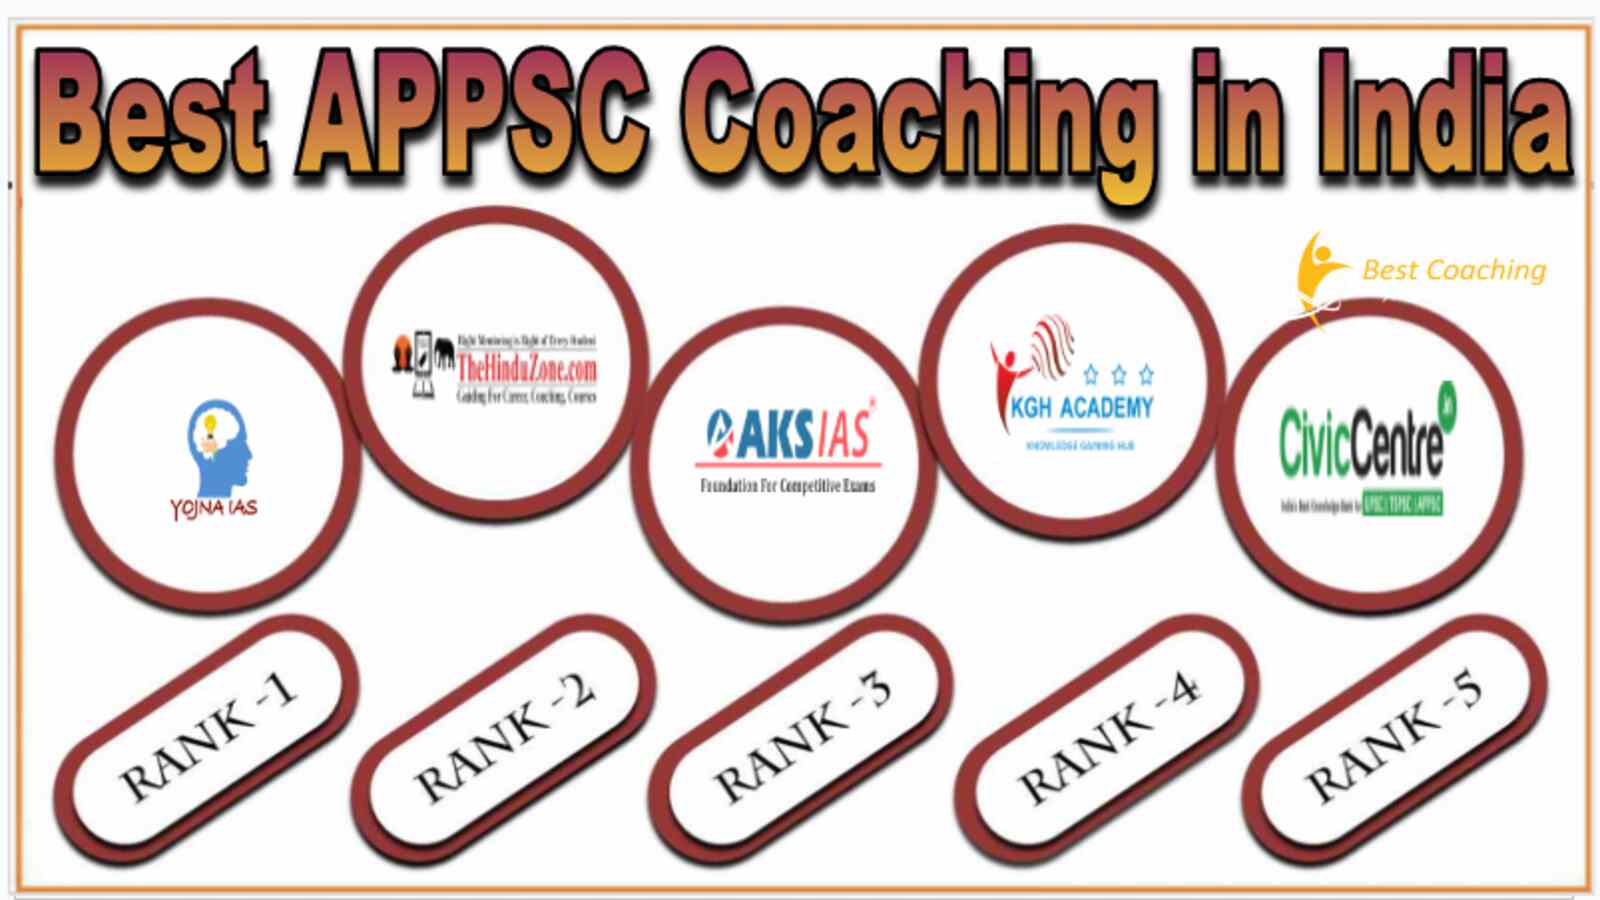 Best APPSC Coaching in India